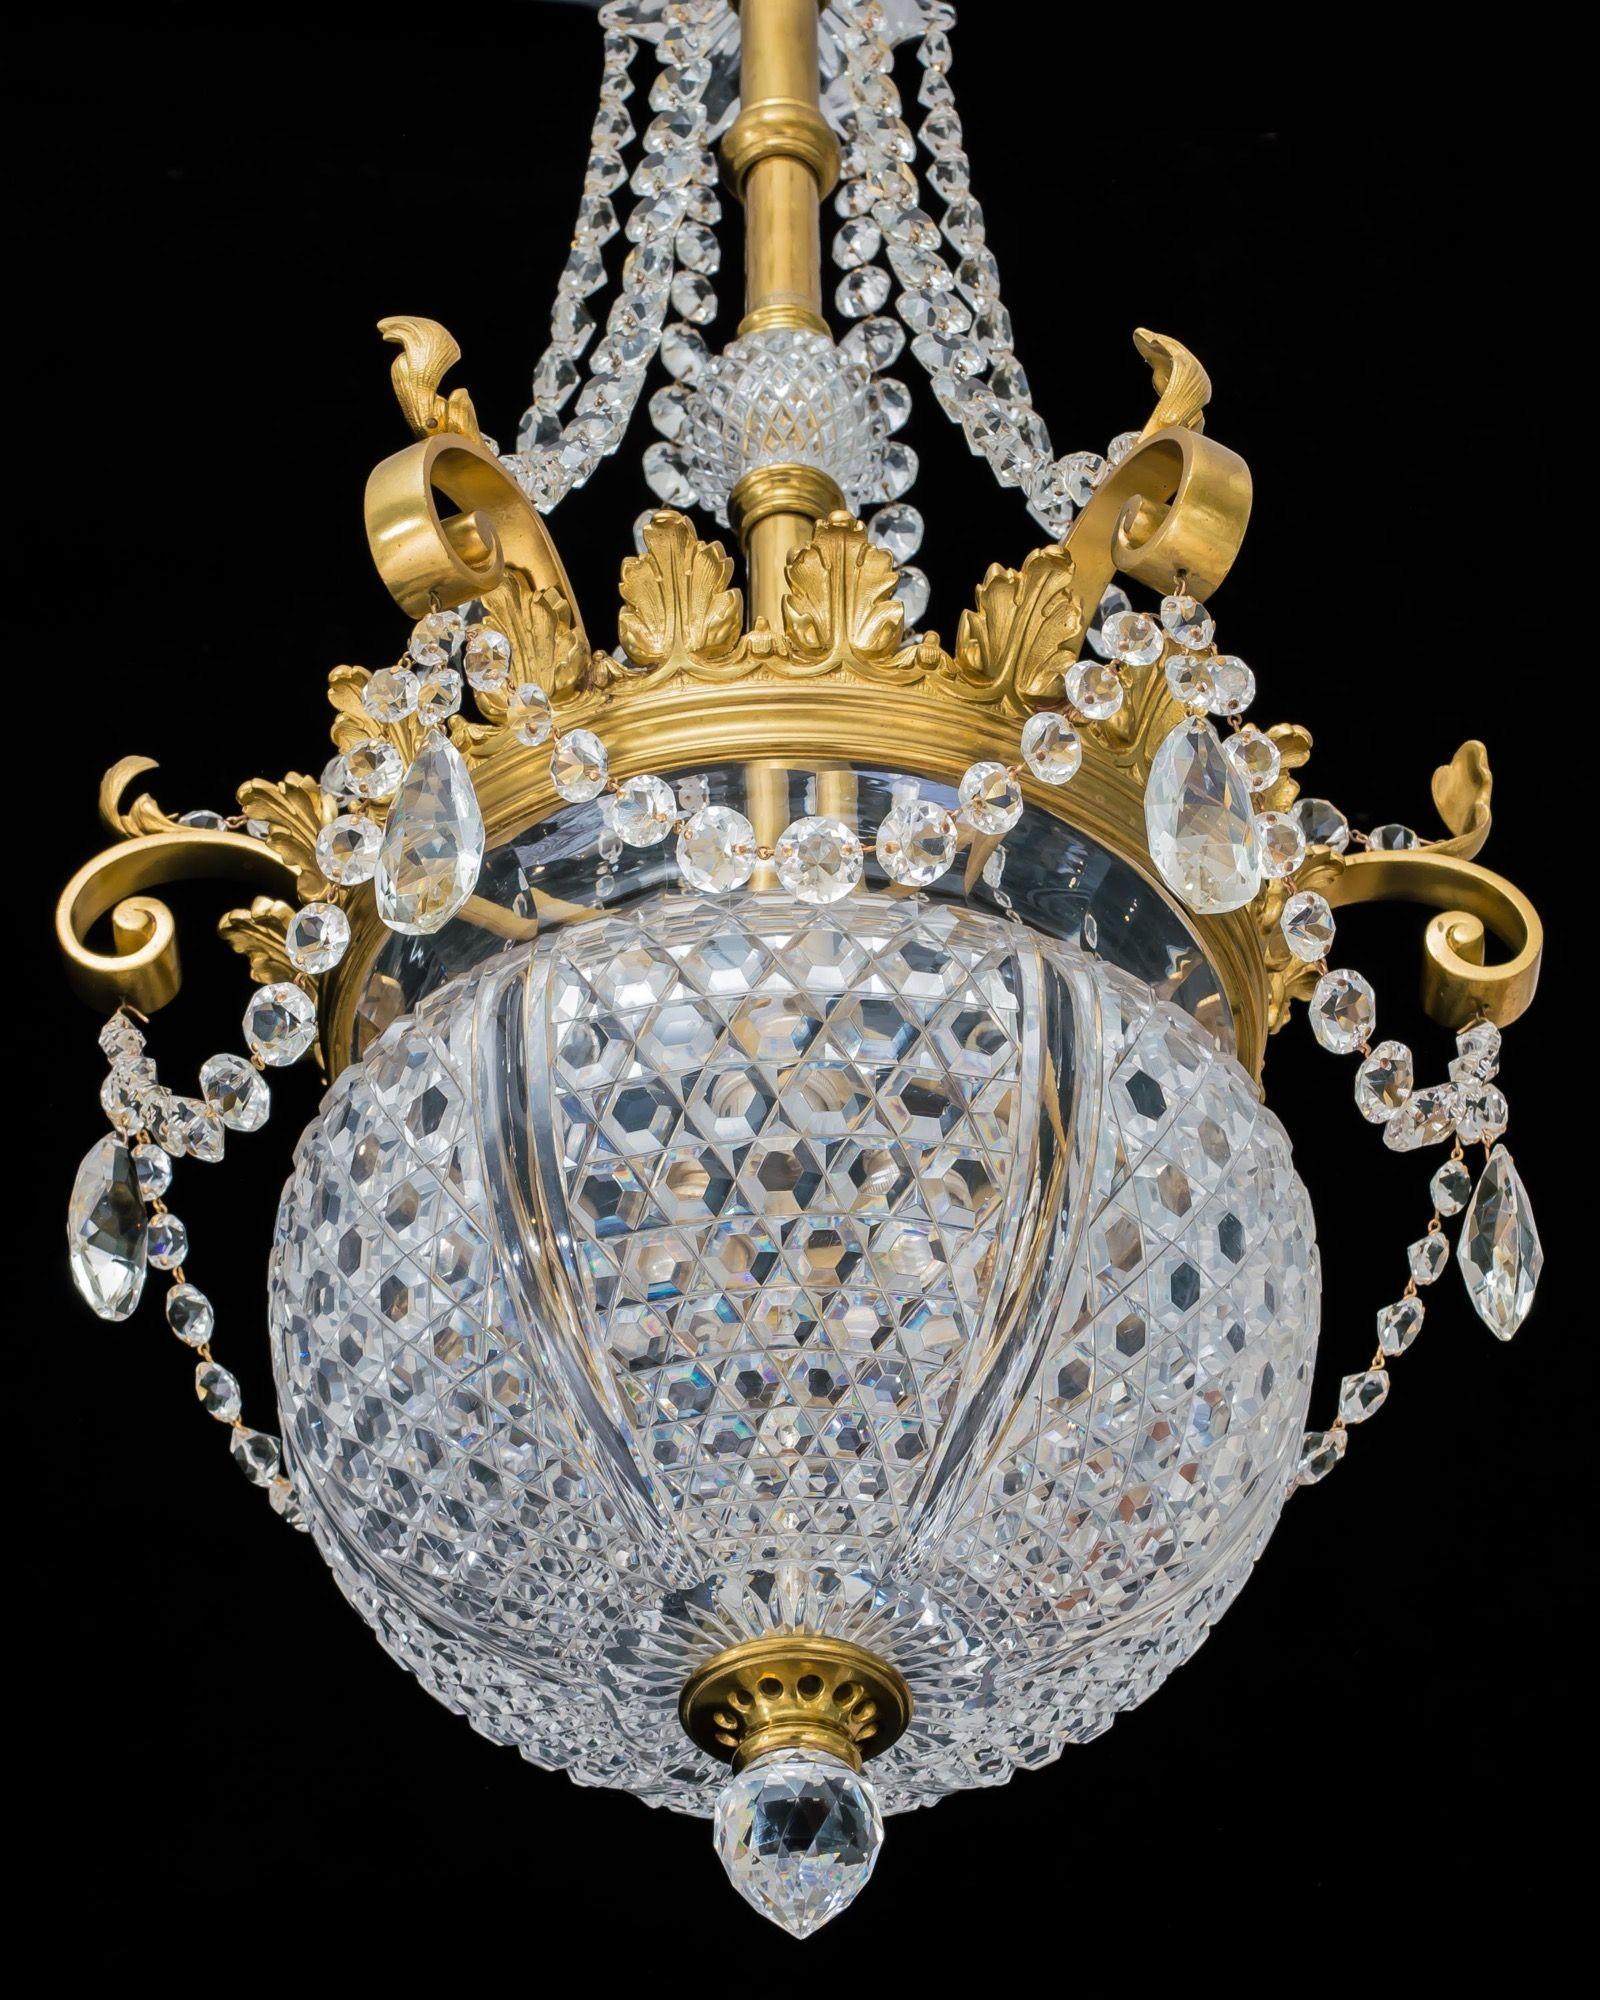 An elaborate ormolu and glass lantern by F&C Osler, with hexagonal cut panelled bowl mounted in an ormolu ring, decorated with leaf atheneums and swaged with glass spangles. A central rod, with central cut glass ball, leading to top canopy, hung